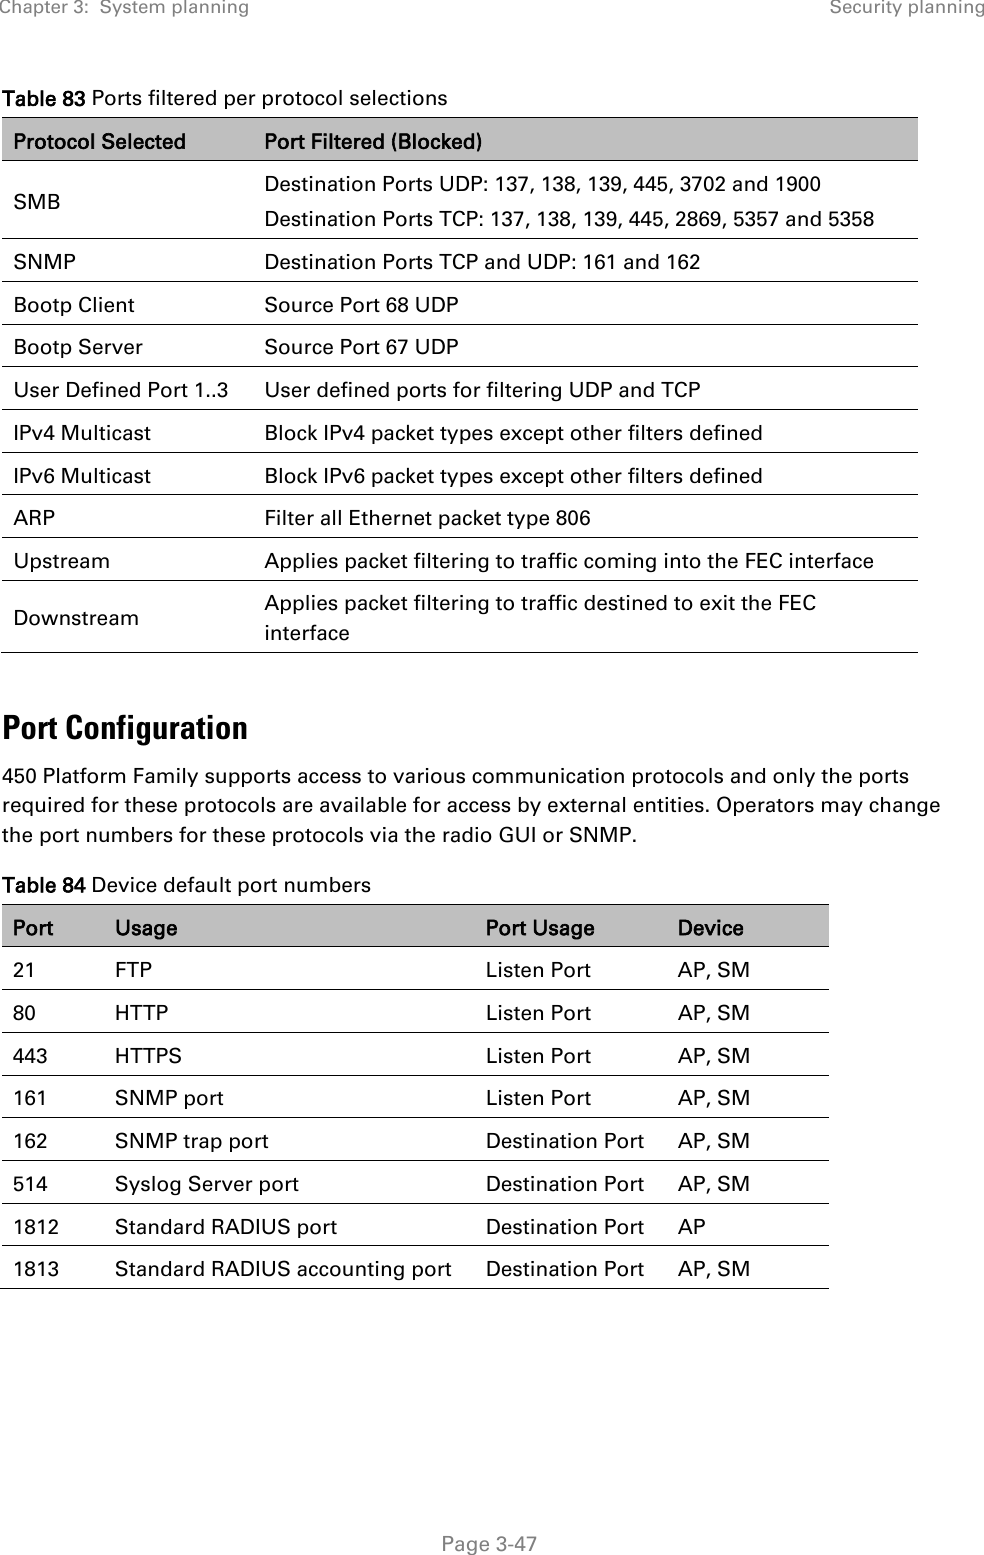 Chapter 3:  System planning Security planning   Page 3-47 Table 83 Ports filtered per protocol selections   Port Configuration 450 Platform Family supports access to various communication protocols and only the ports required for these protocols are available for access by external entities. Operators may change the port numbers for these protocols via the radio GUI or SNMP. Table 84 Device default port numbers Port Usage Port Usage Device 21  FTP  Listen Port AP, SM 80  HTTP  Listen Port AP, SM 443  HTTPS  Listen Port AP, SM 161 SNMP port Listen Port AP, SM 162 SNMP trap port Destination Port AP, SM 514 Syslog Server port  Destination Port  AP, SM 1812 Standard RADIUS port Destination Port AP 1813 Standard RADIUS accounting port Destination Port AP, SM    Protocol Selected Port Filtered (Blocked) SMB Destination Ports UDP: 137, 138, 139, 445, 3702 and 1900 Destination Ports TCP: 137, 138, 139, 445, 2869, 5357 and 5358 SNMP Destination Ports TCP and UDP: 161 and 162 Bootp Client Source Port 68 UDP Bootp Server Source Port 67 UDP User Defined Port 1..3 User defined ports for filtering UDP and TCP IPv4 Multicast Block IPv4 packet types except other filters defined IPv6 Multicast Block IPv6 packet types except other filters defined ARP Filter all Ethernet packet type 806 Upstream   Applies packet filtering to traffic coming into the FEC interface Downstream  Applies packet filtering to traffic destined to exit the FEC interface 